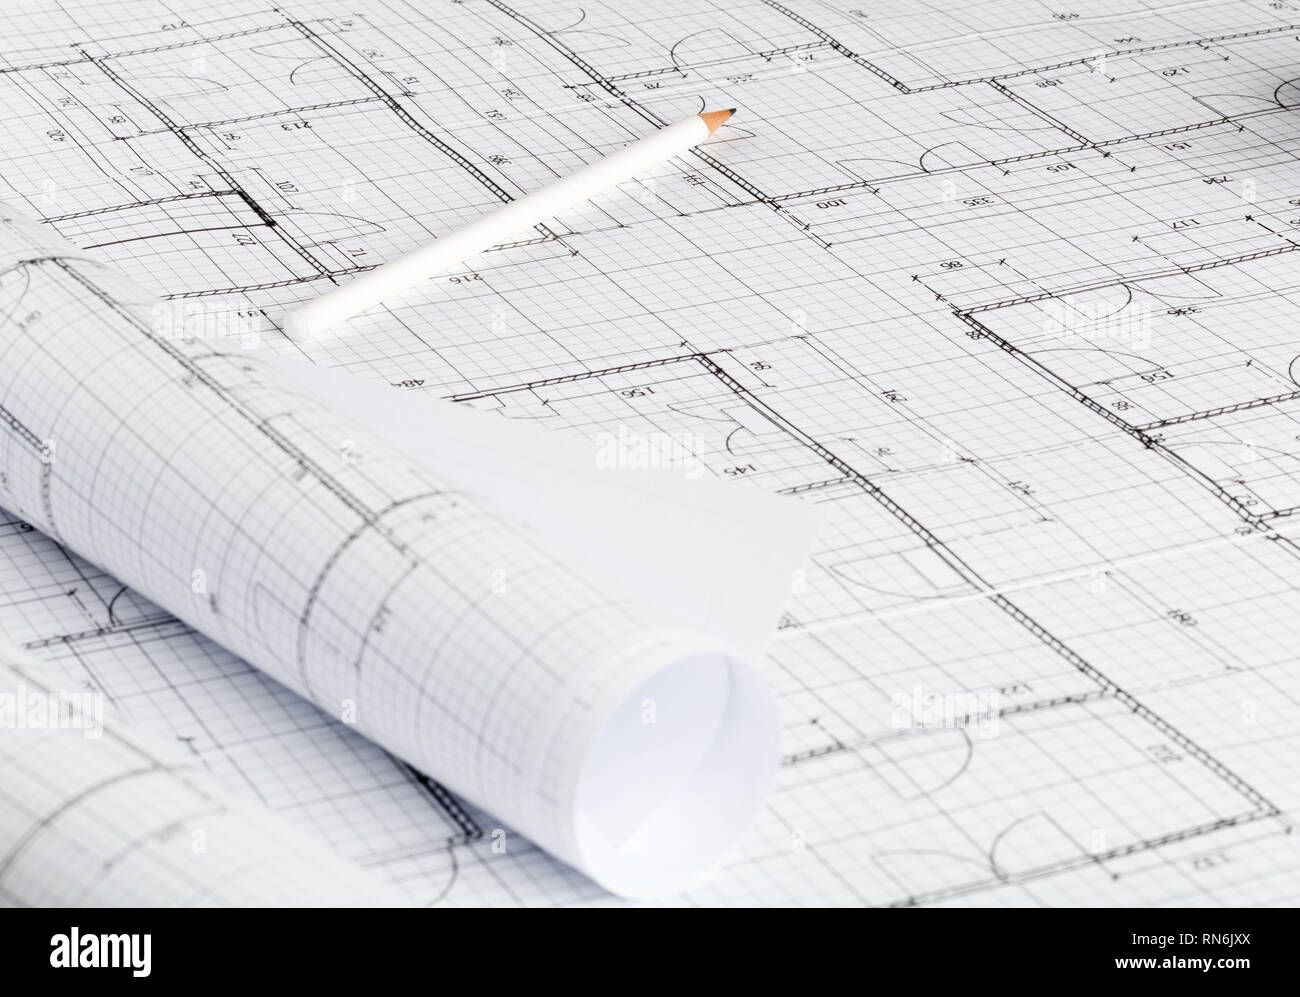 Rolls of architectural blueprint house building plans on blueprint background on table with pencil Stock Photo